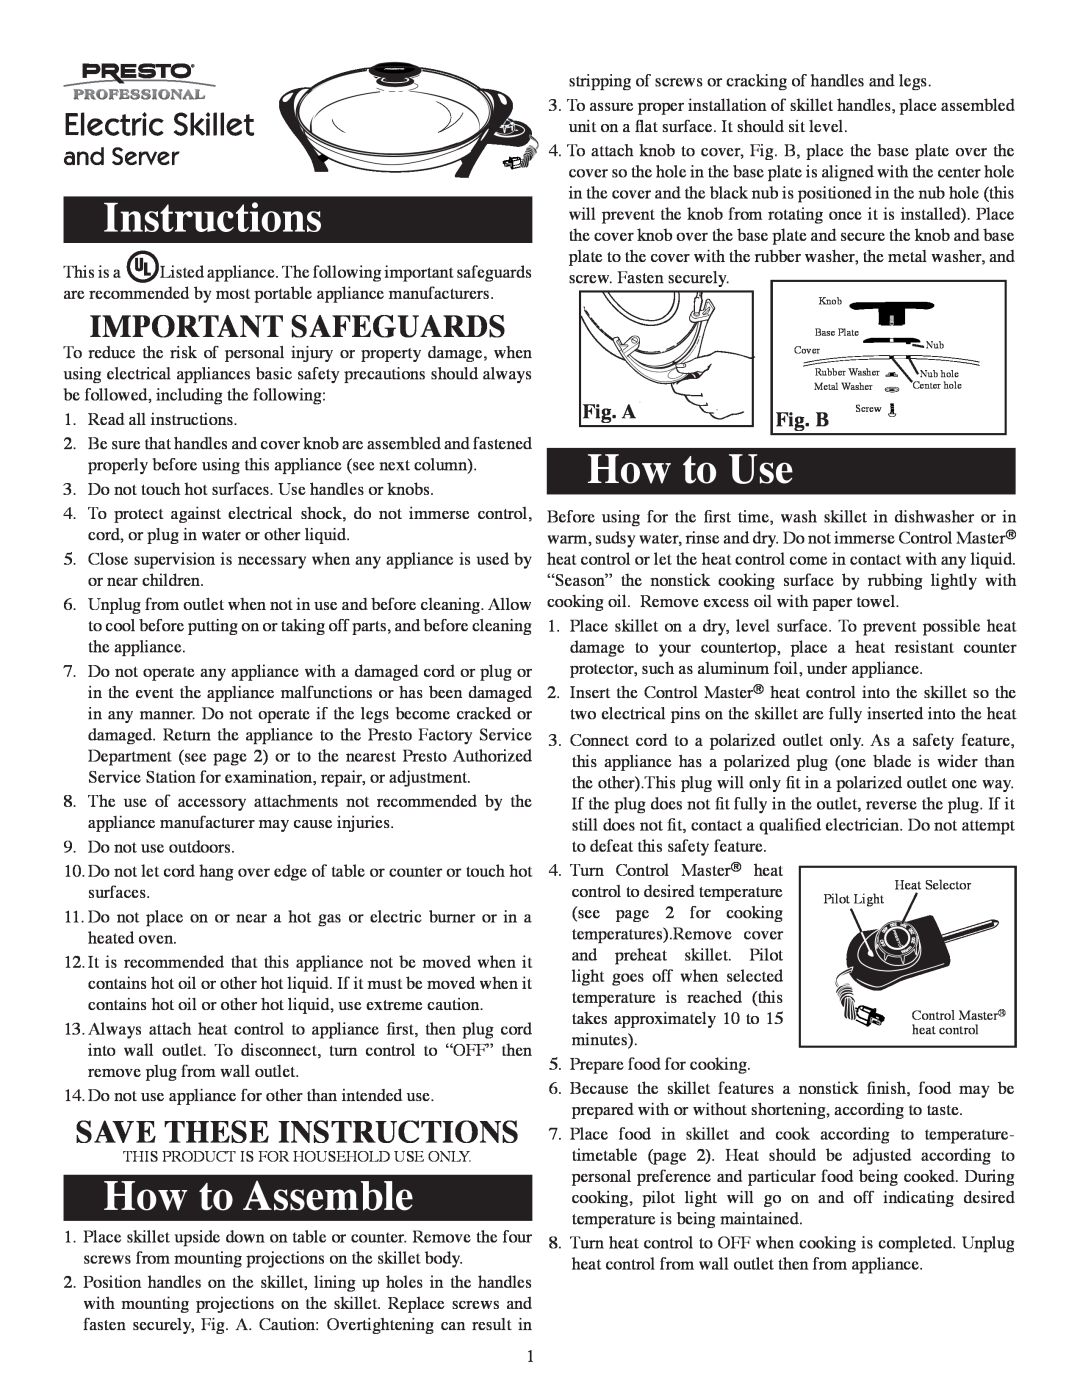 Presto Fryer manual How to Use, How to Assemble, Electric Skillet, Save These Instructions, Important Safeguards 